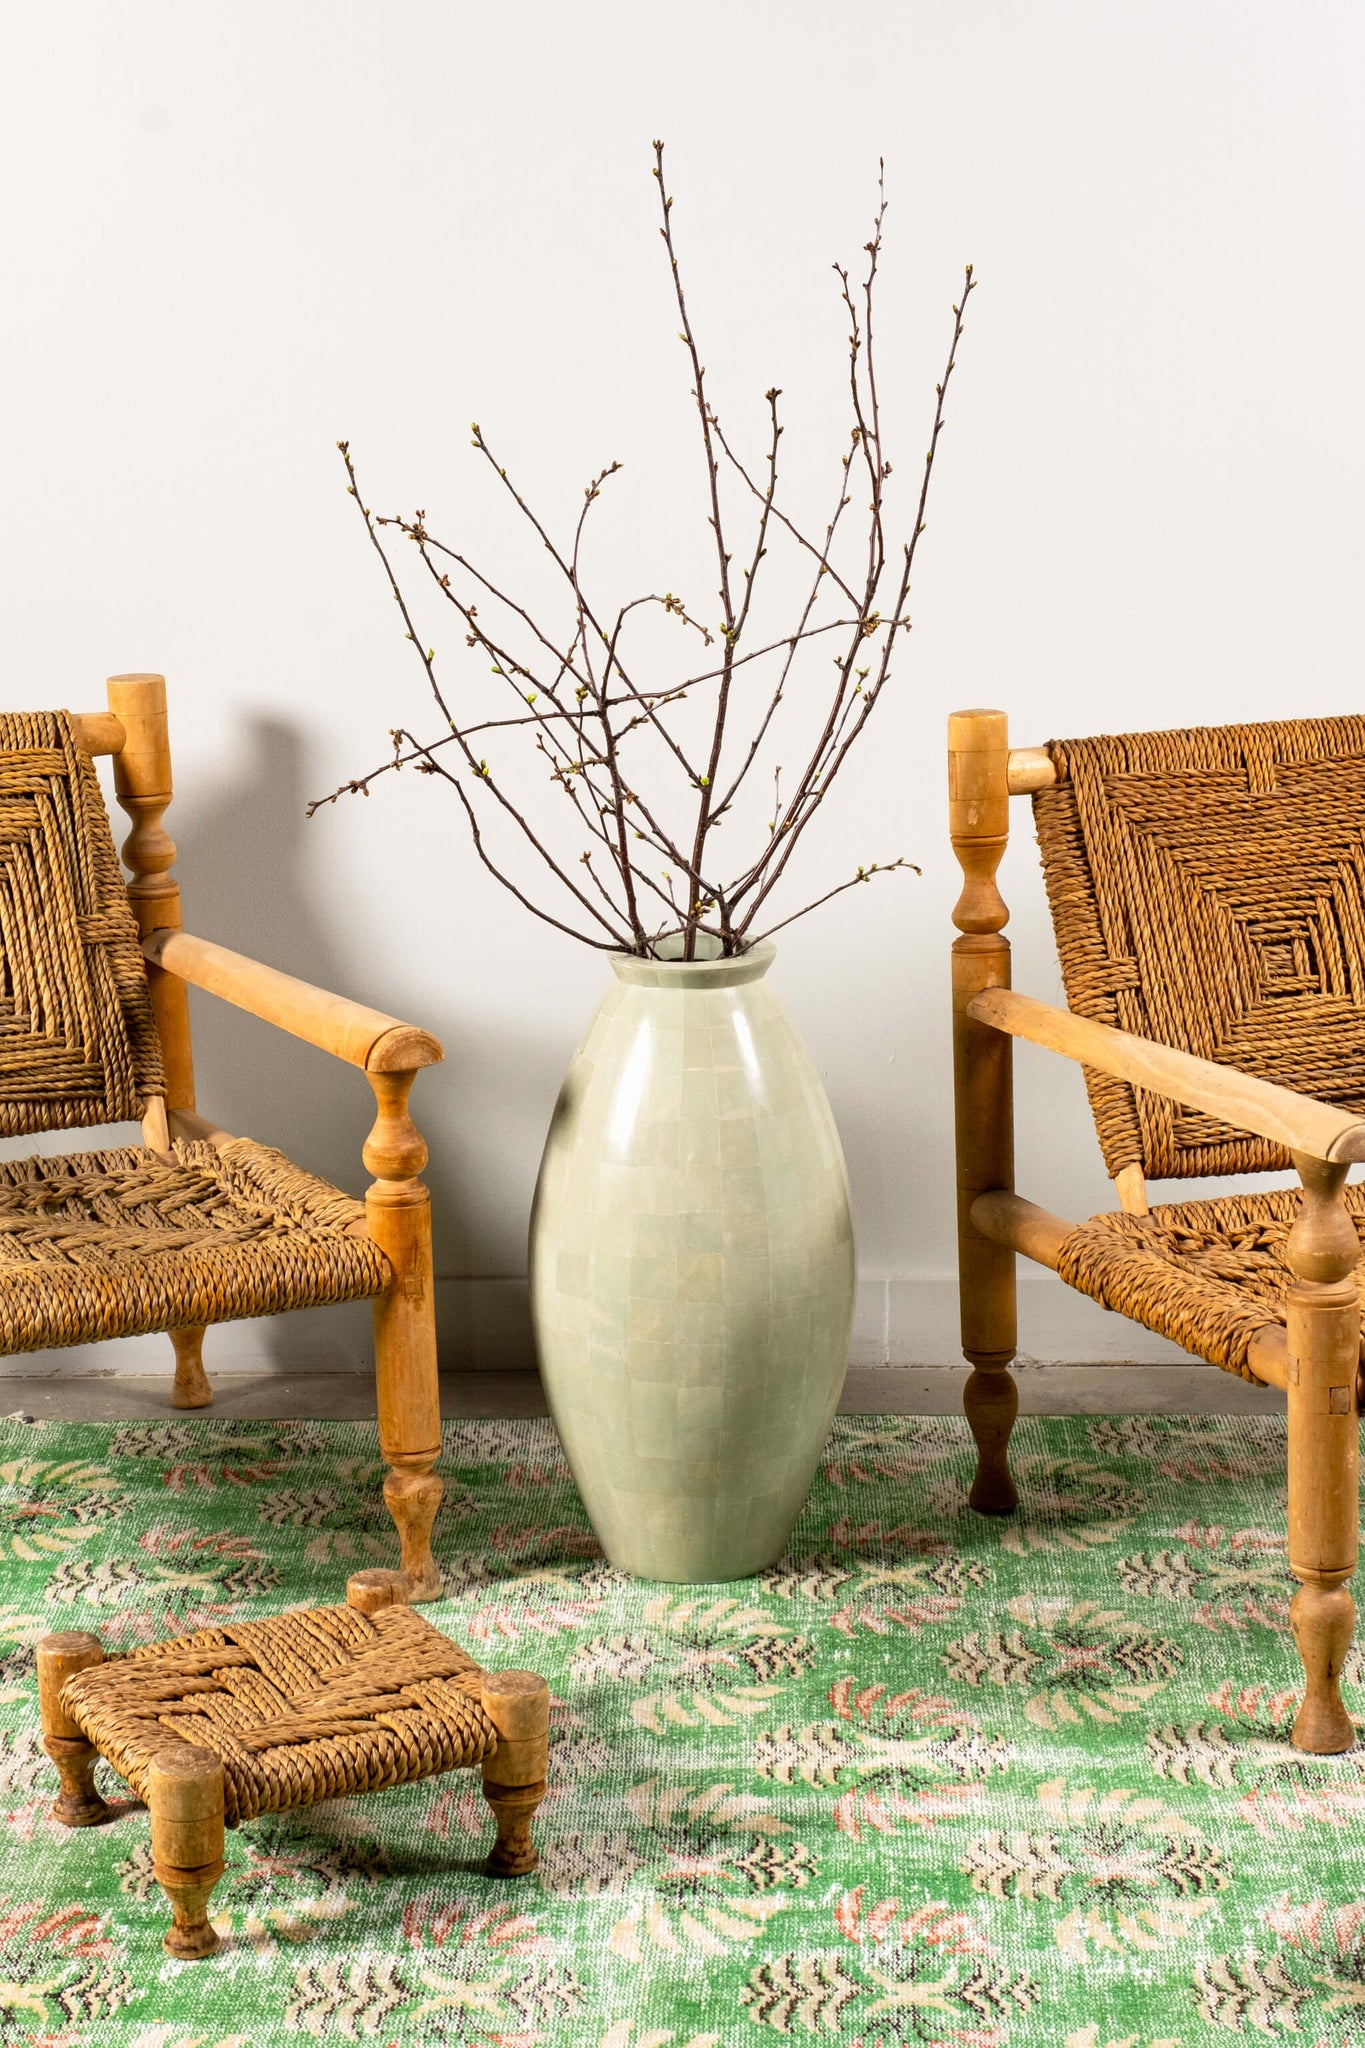 Vintage Green Laminated Wood Block Vase, shown with wood and jute chairs with ottoman